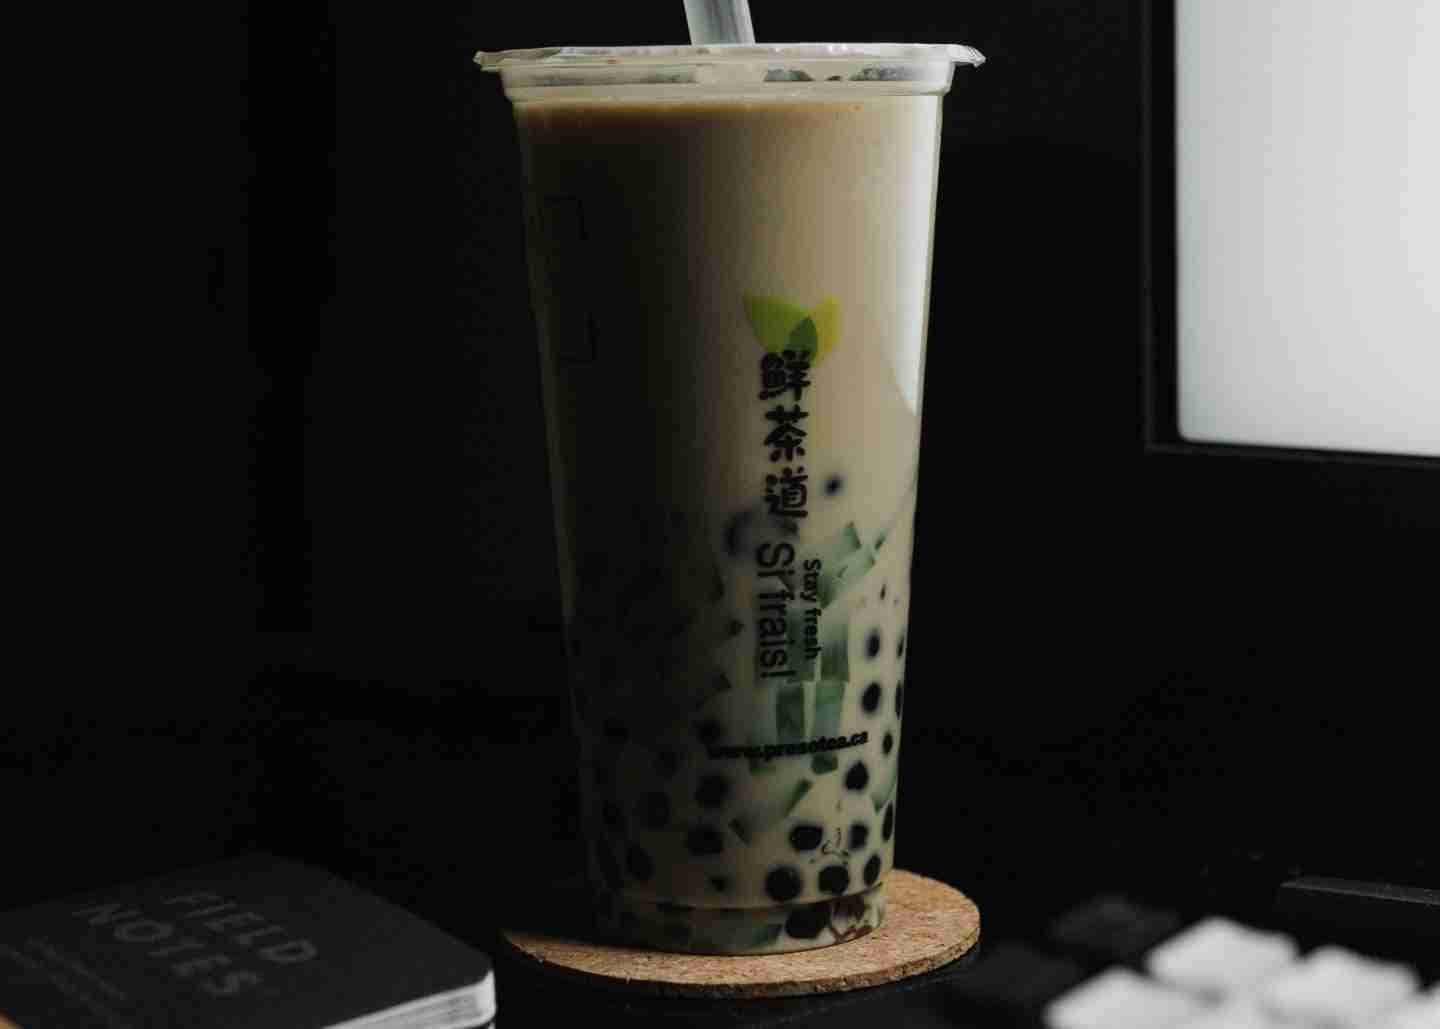 Bubble tea resting on a coster between a computer and a notebook.